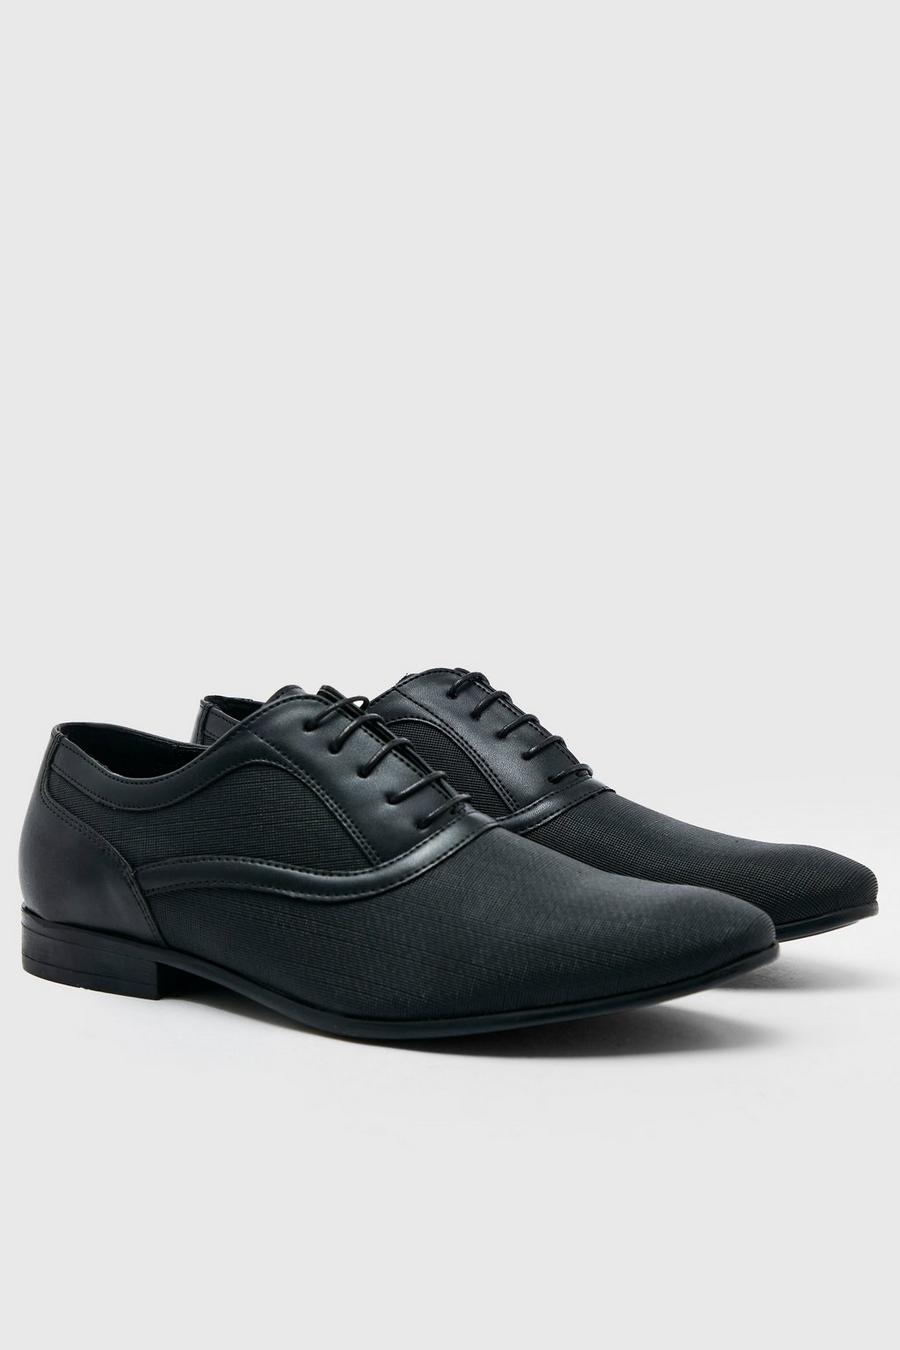 Black noir Embossed Faux Leather Oxford